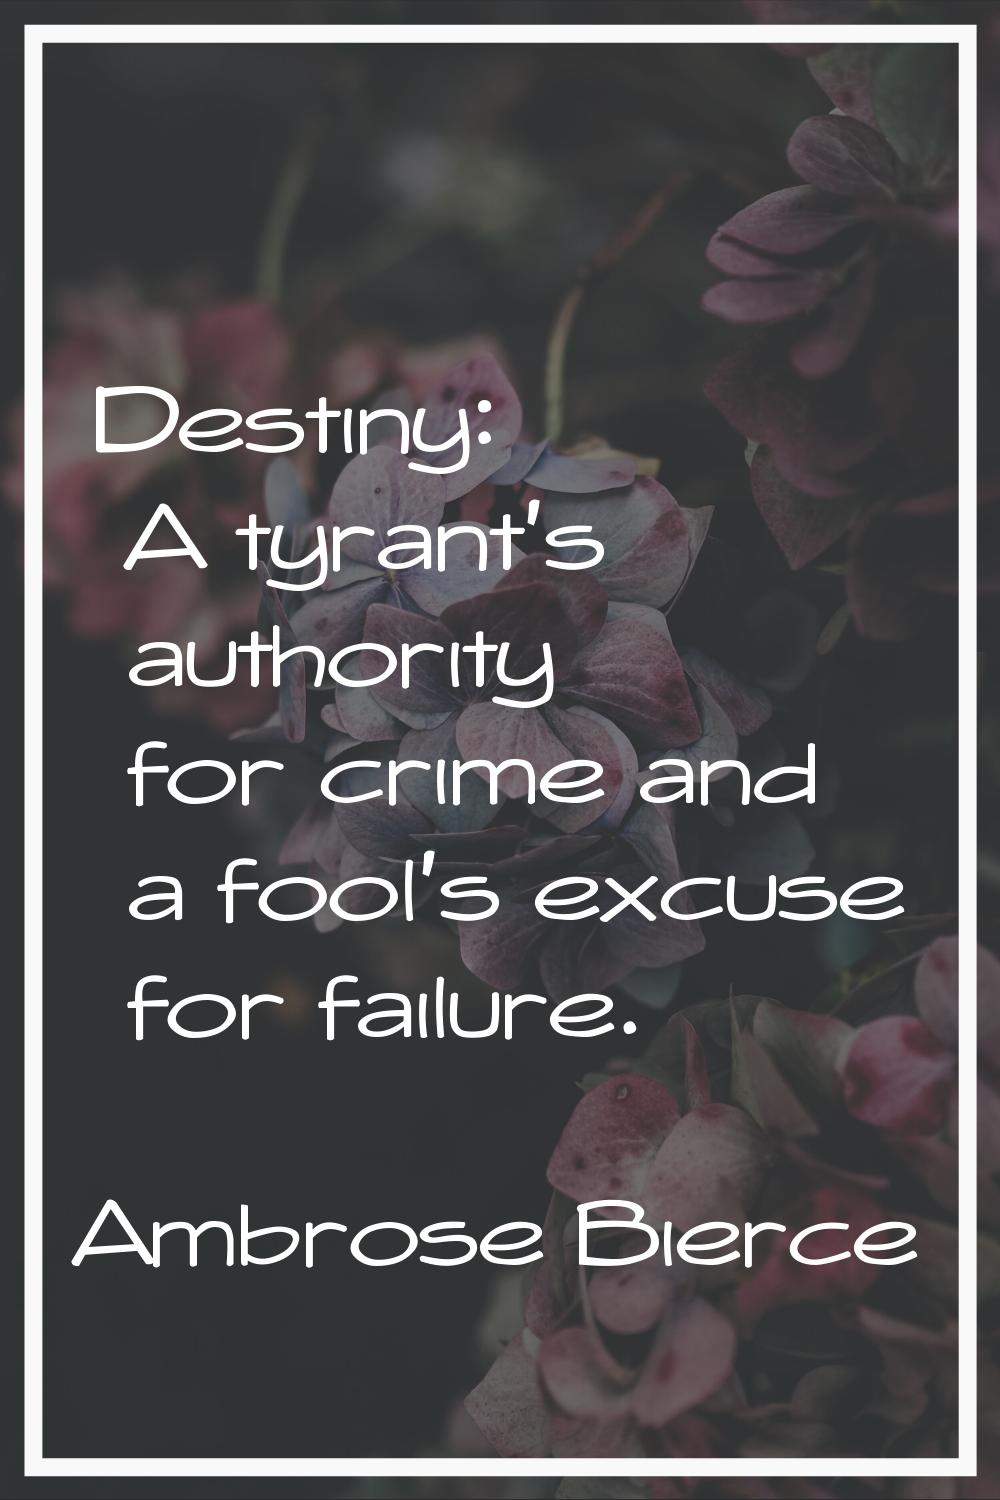 Destiny: A tyrant's authority for crime and a fool's excuse for failure.